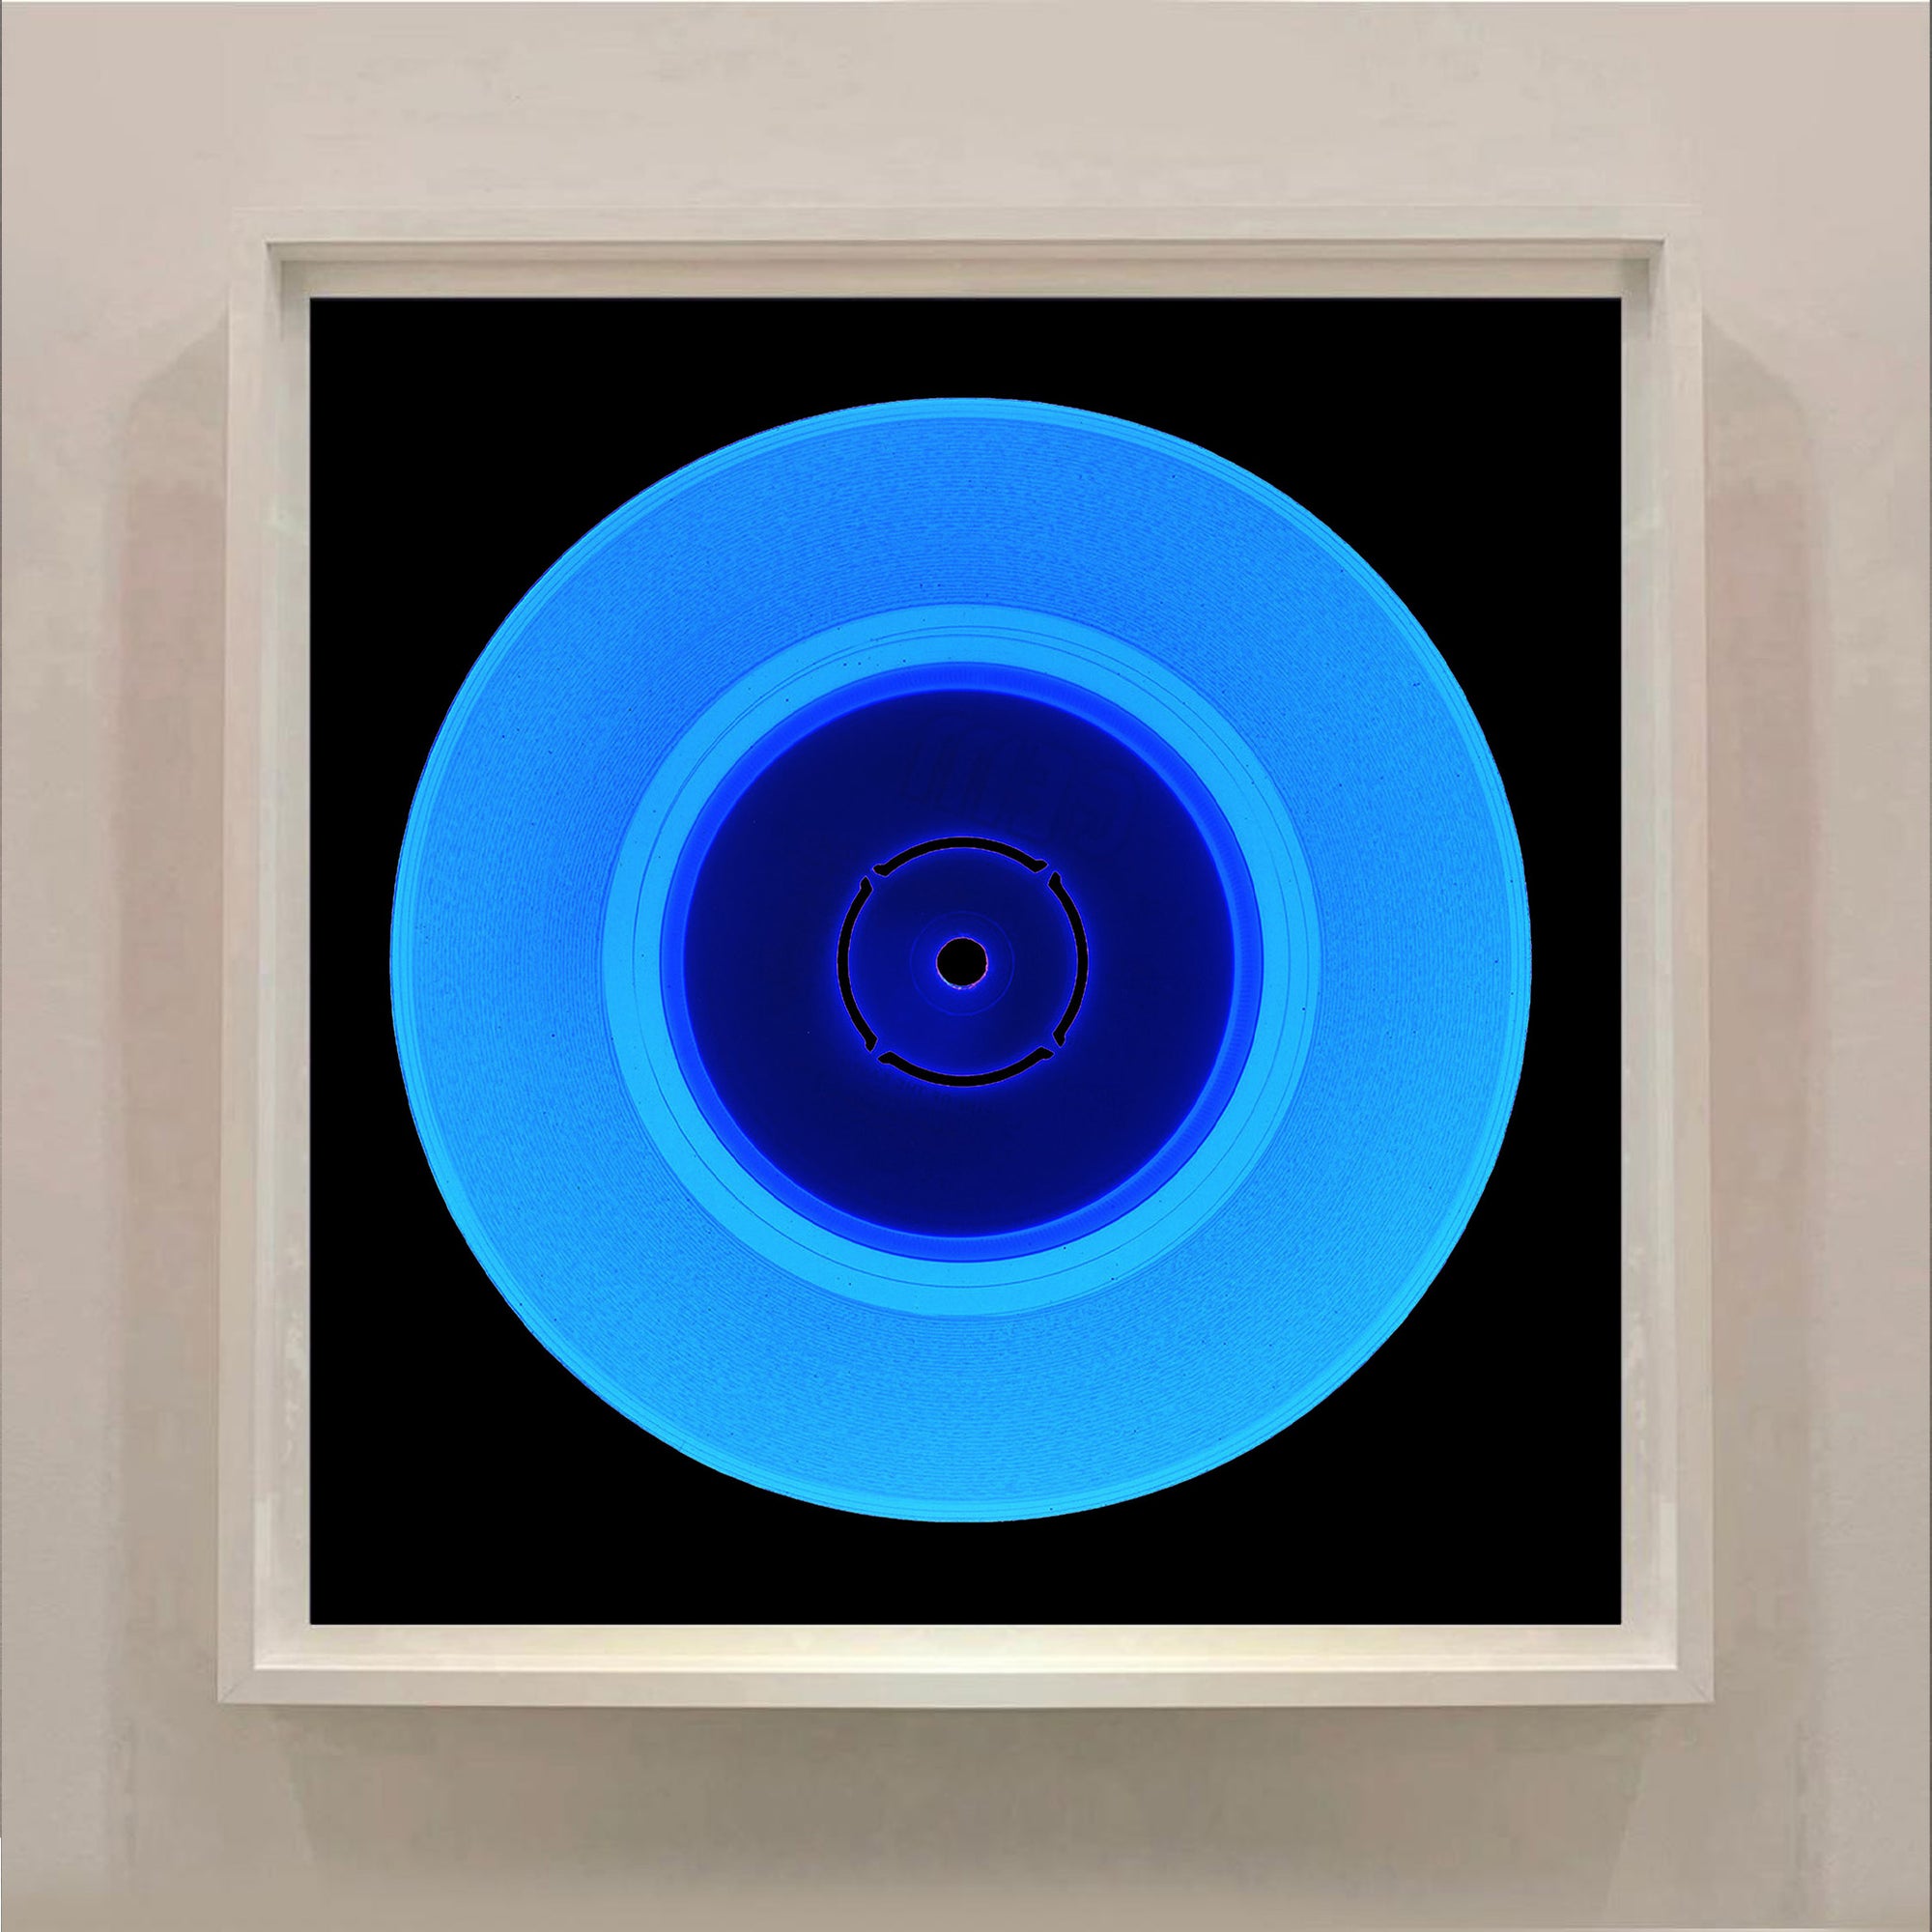 Vinyl Collection 'Double B Side Blue', 2020. Pop art made in our Cambridge darkroom. Mix and match them to make your very own Heidler & Heeps Vinyl Collection. Acclaimed contemporary photographers, Richard Heeps and Natasha Heidler have collaborated to make this beautifully mesmerising collection. A celebration of the vinyl record and analogue technology, which reflects the artists practice within photography.